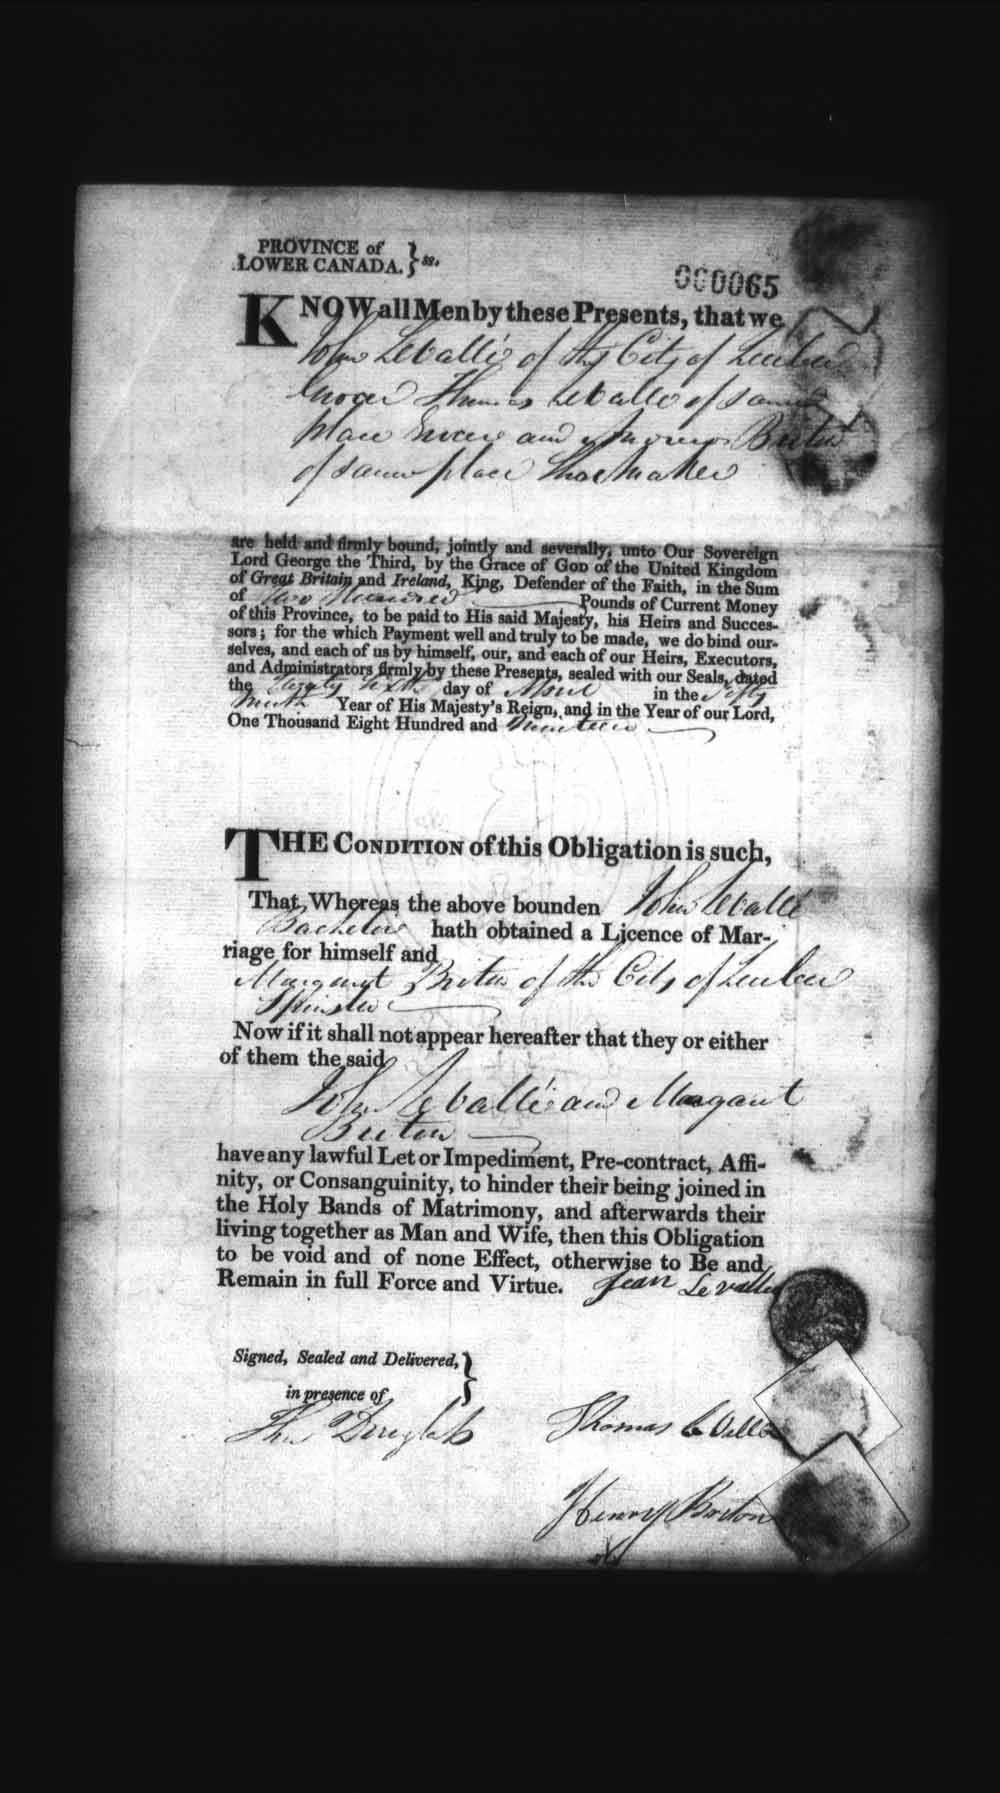 Digitized page of Upper and Lower Canada Marriage Bonds (1779-1865) for Image No.: e008235889